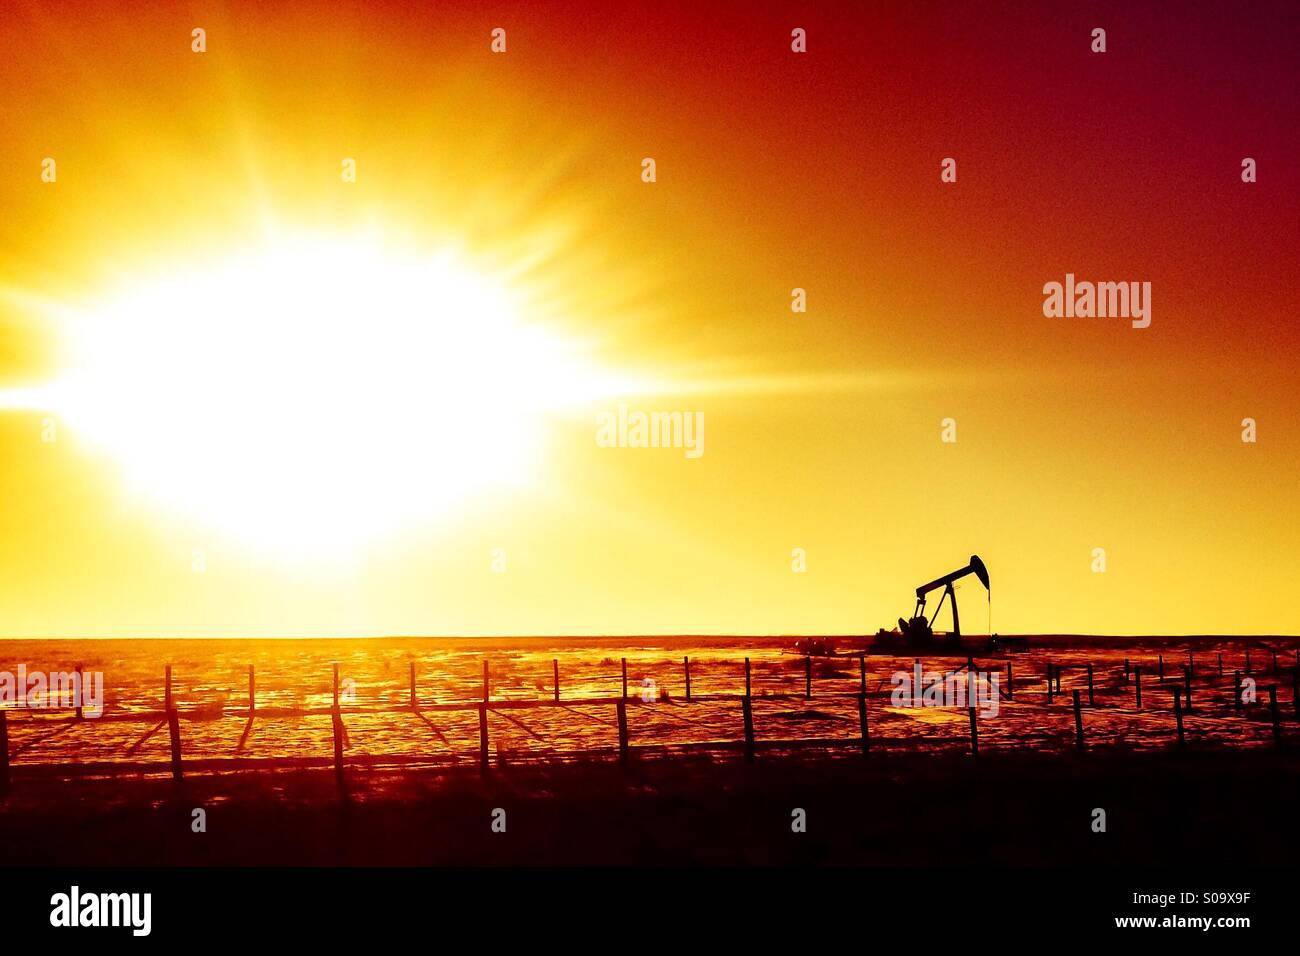 Oil rig in the prairies of Alberta, Canada at sunset. Stock Photo